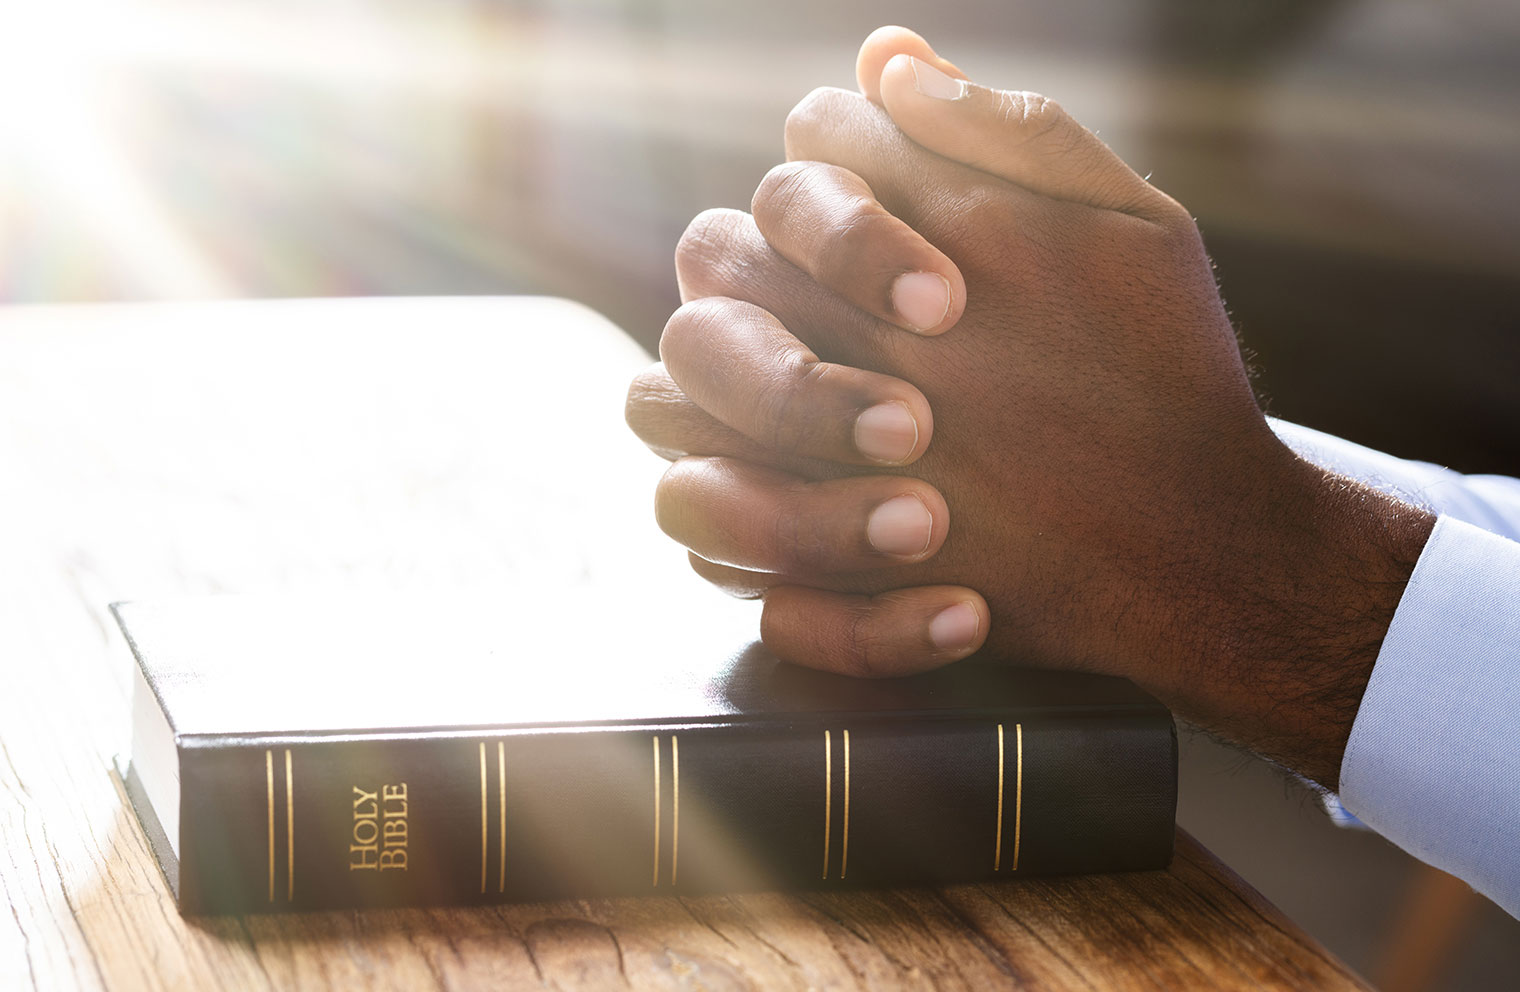 Image of person's hands closed together on top of a Bible.